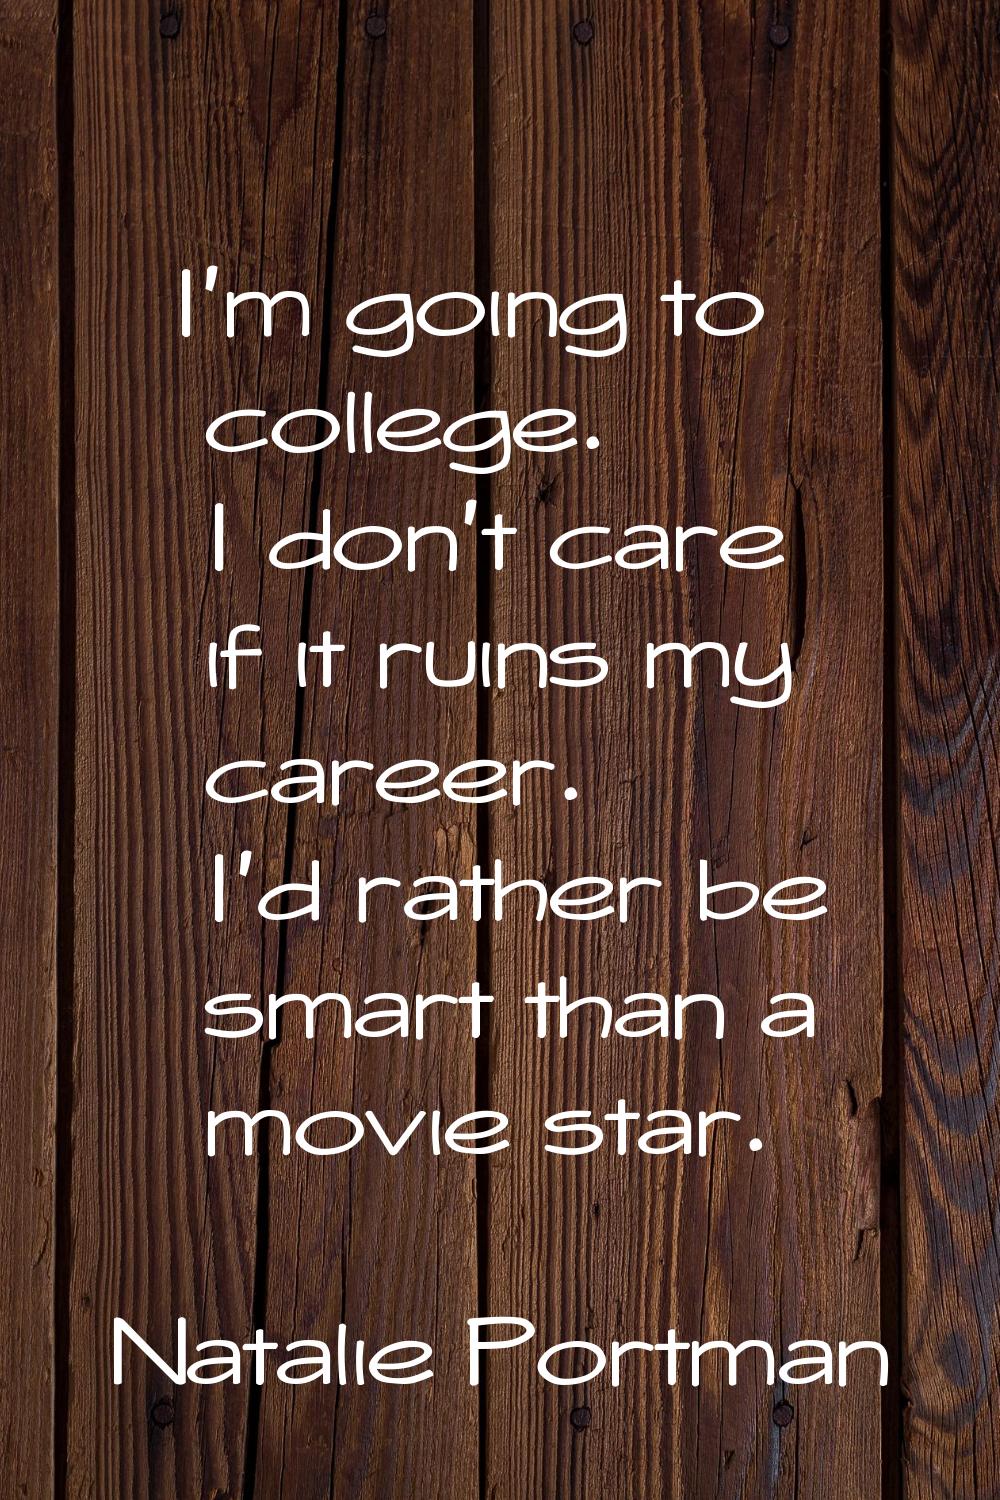 I'm going to college. I don't care if it ruins my career. I'd rather be smart than a movie star.